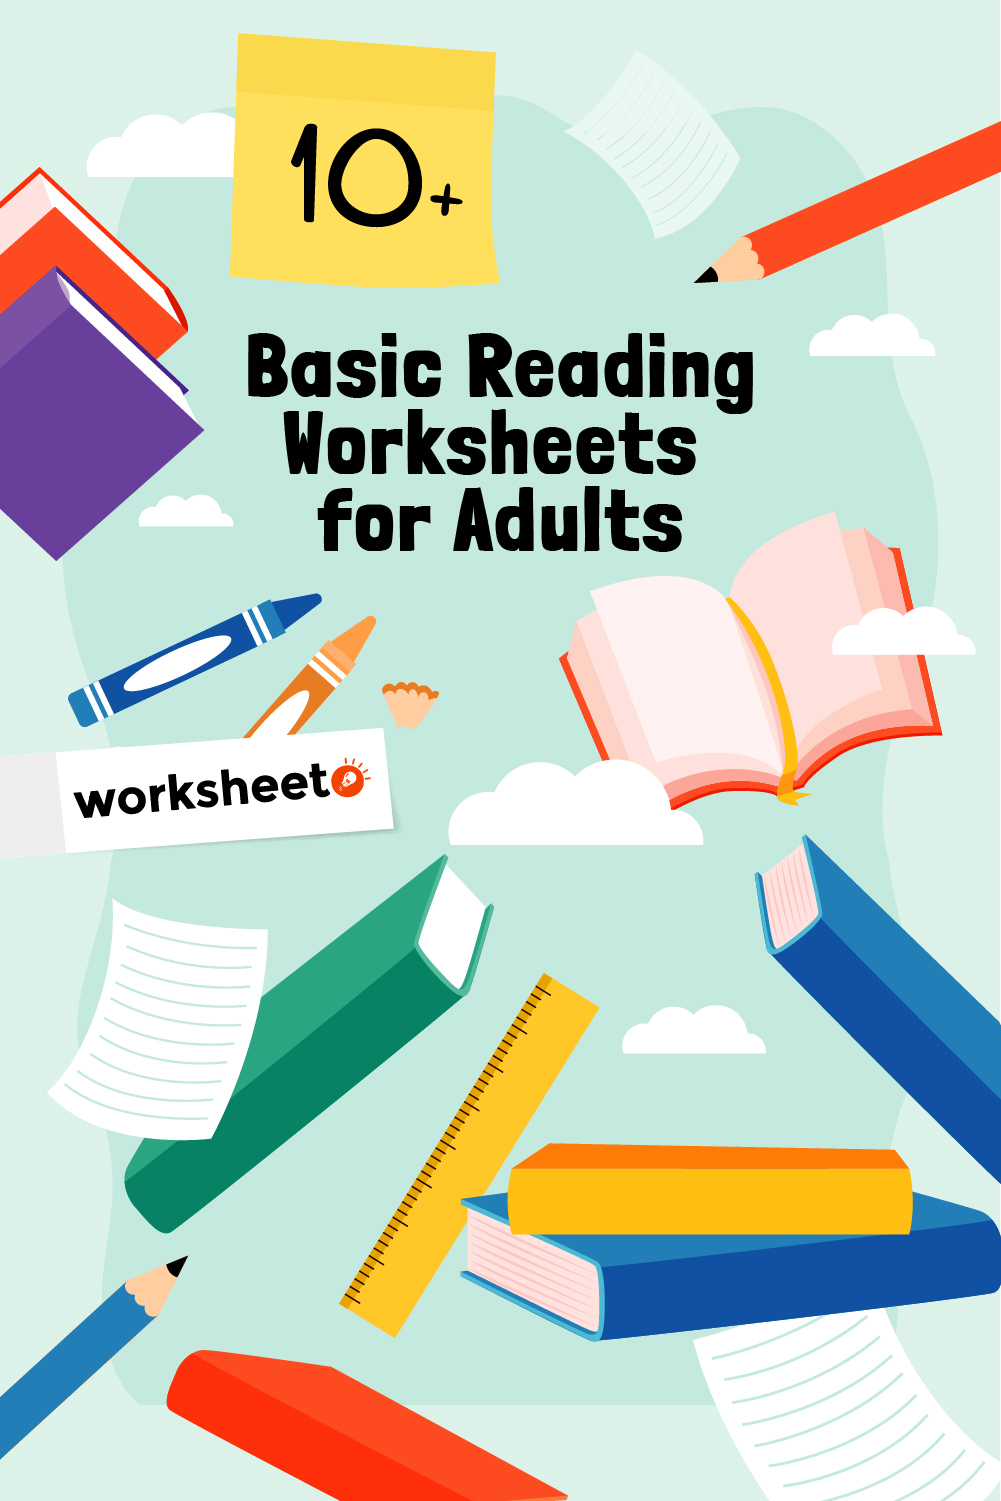 Basic Reading Worksheets for Adults